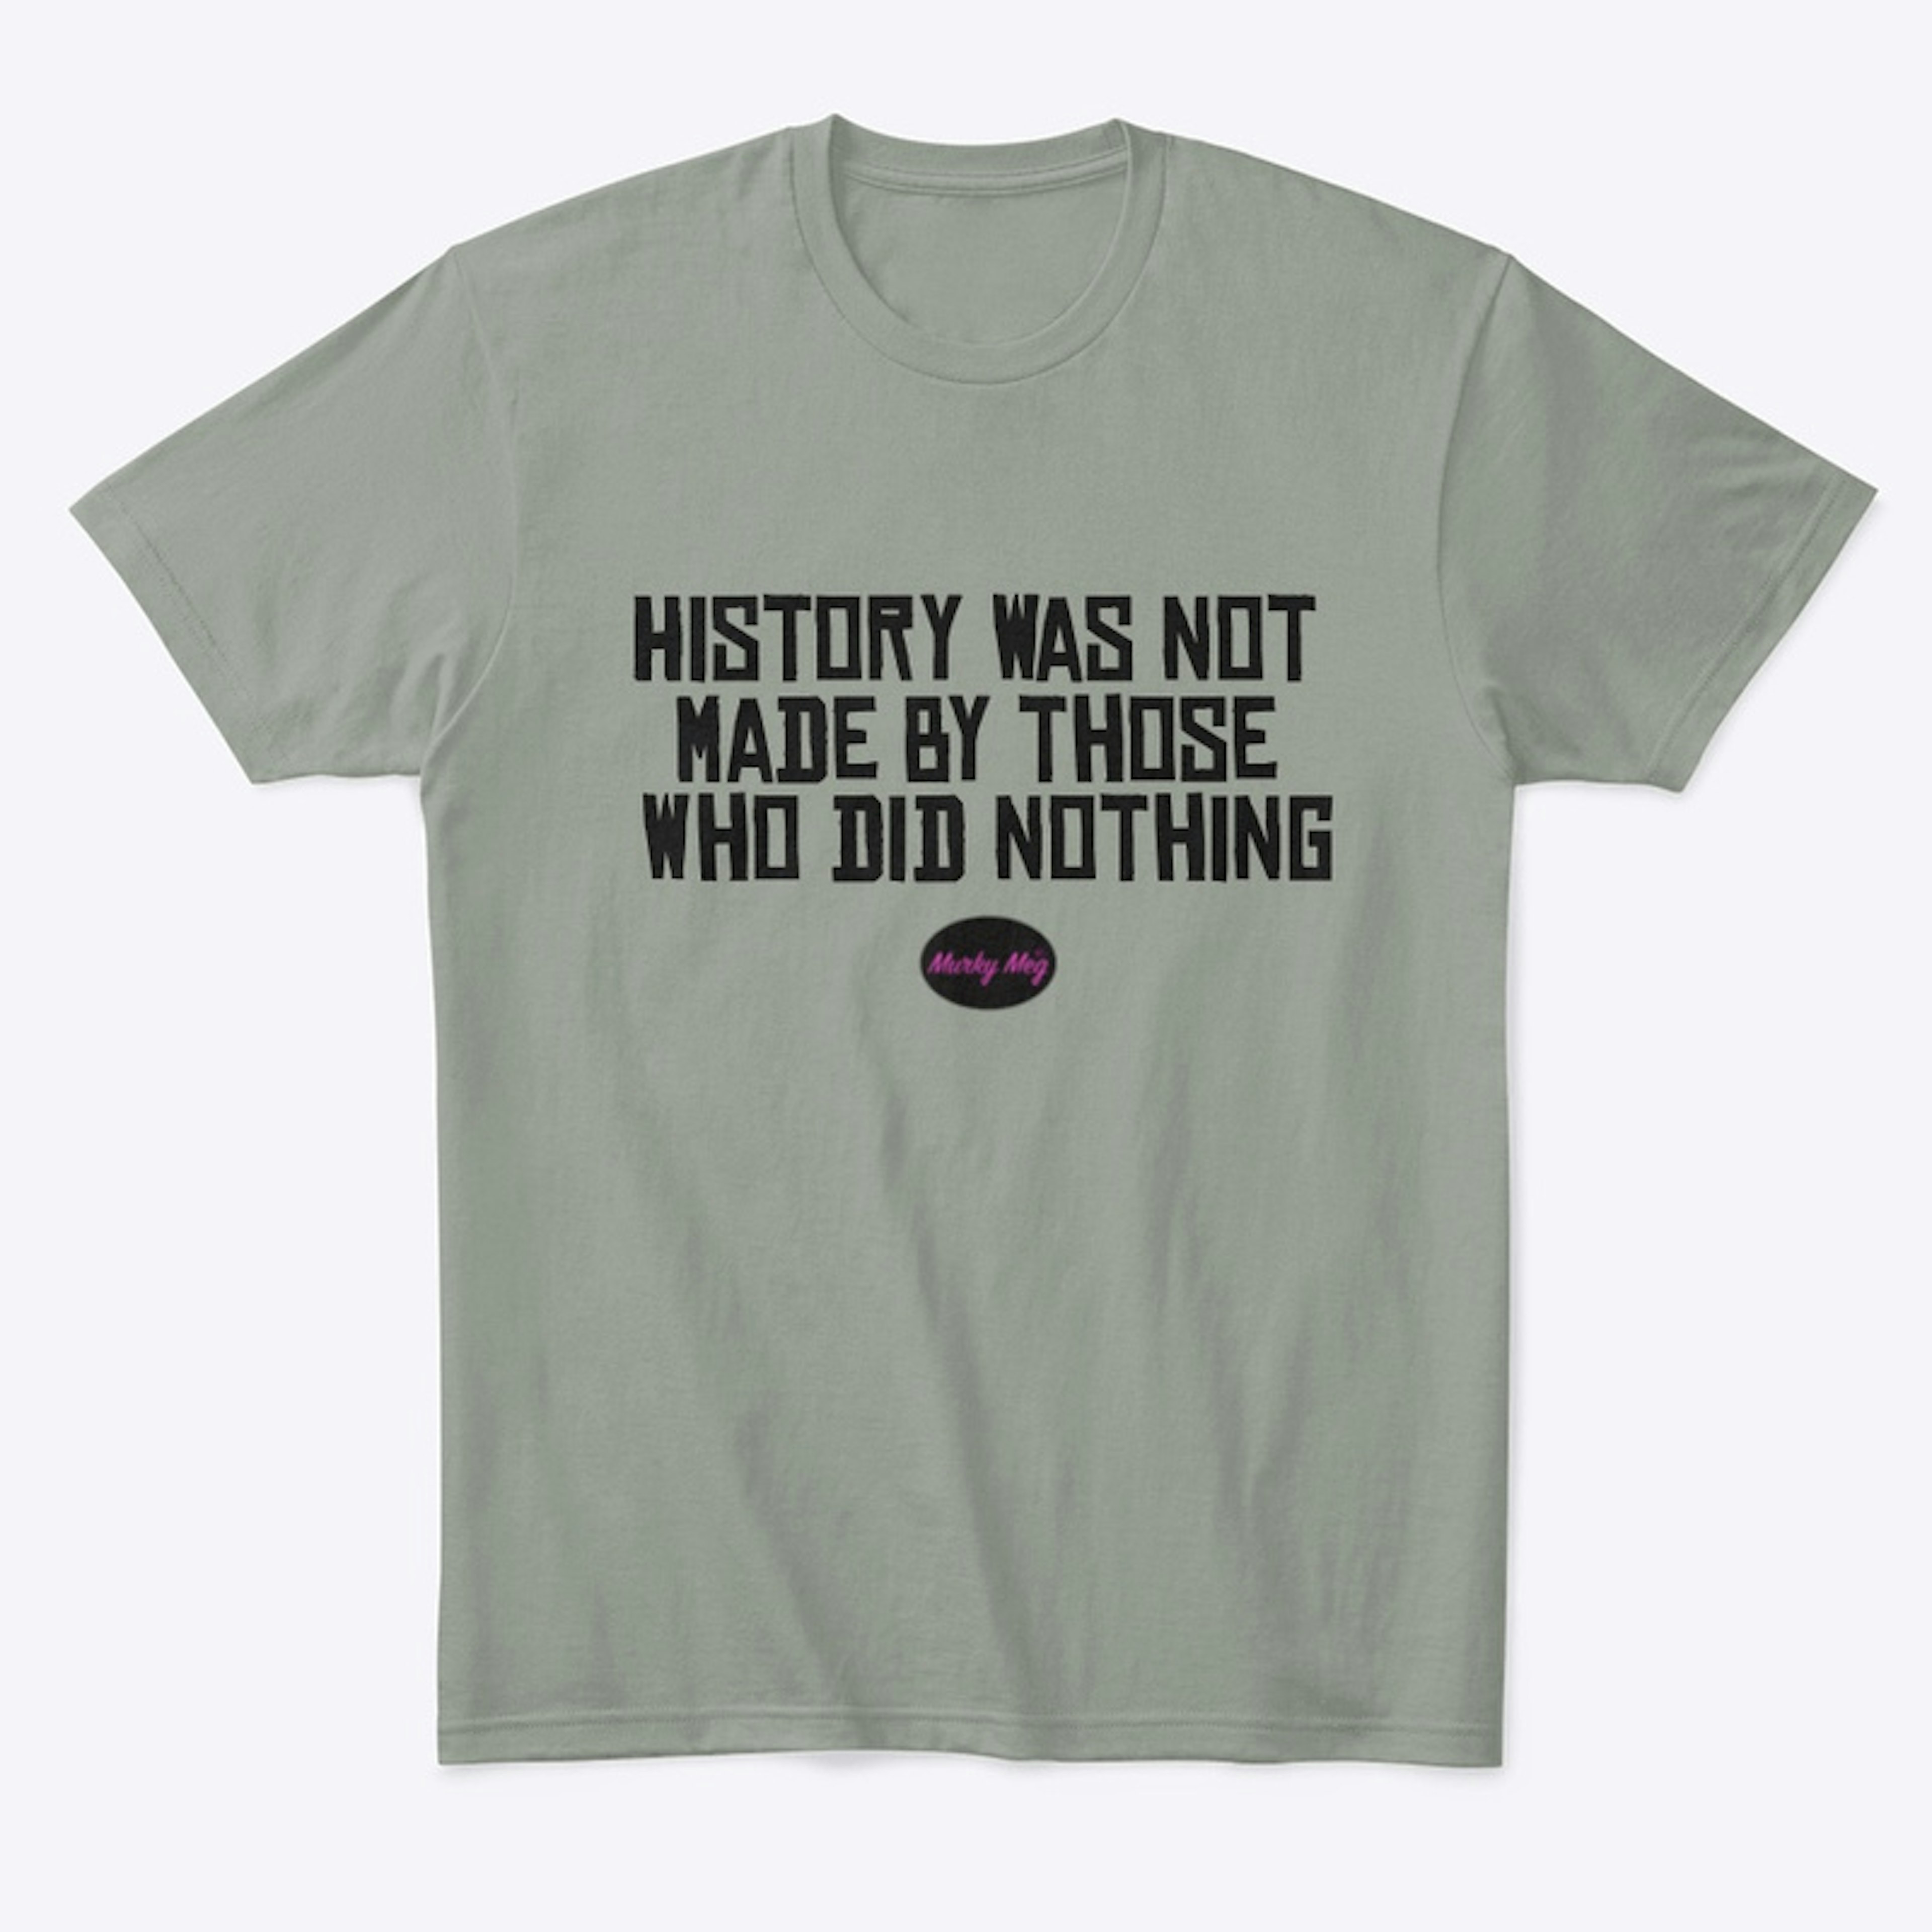 NEW History was not made Tee